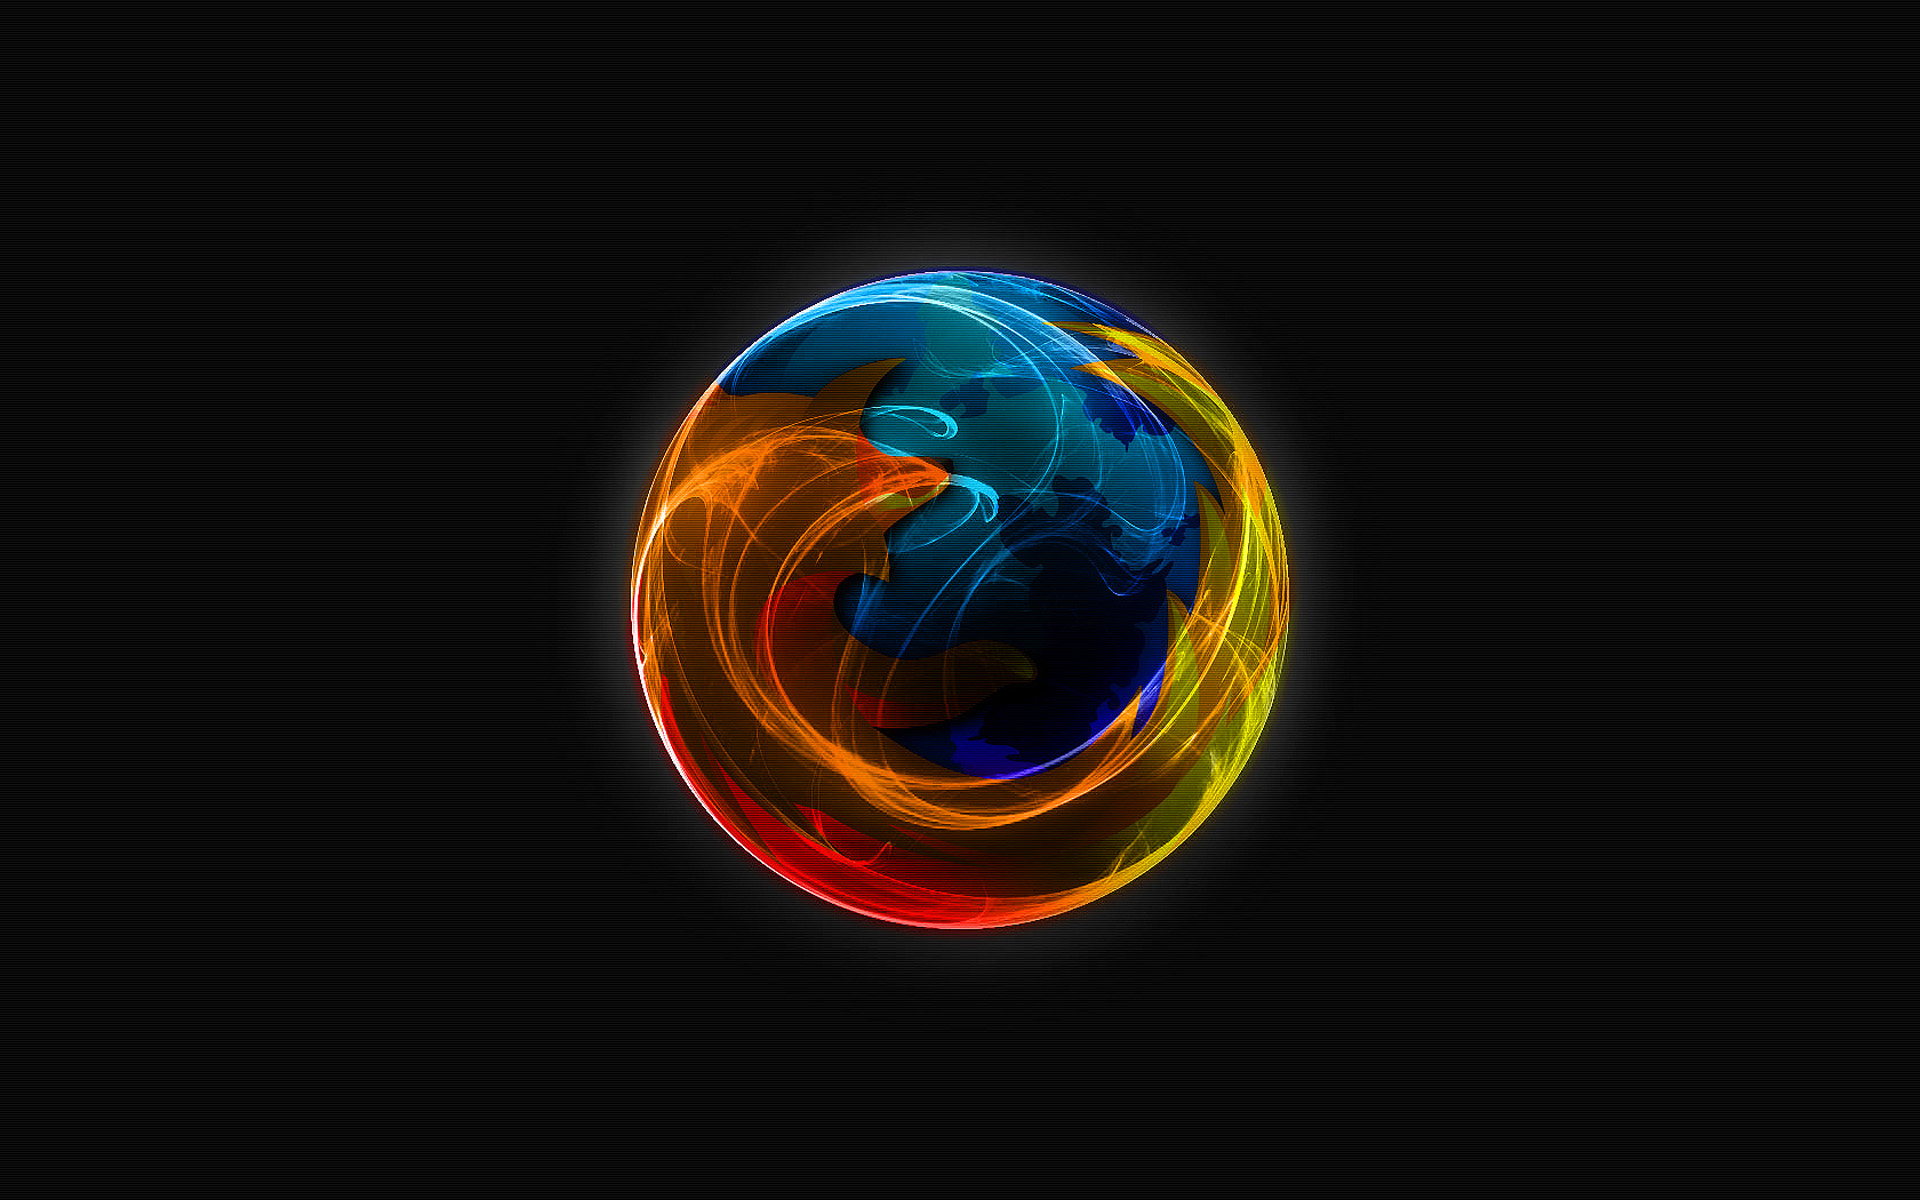 Free Download Mozilla Firefox Wallpapers 19x10 3922 19x10 For Your Desktop Mobile Tablet Explore 73 Firefox Wallpaper Firefox Wallpaper Themes How To Change Firefox Wallpaper Firefox Wallpaper 19x1080